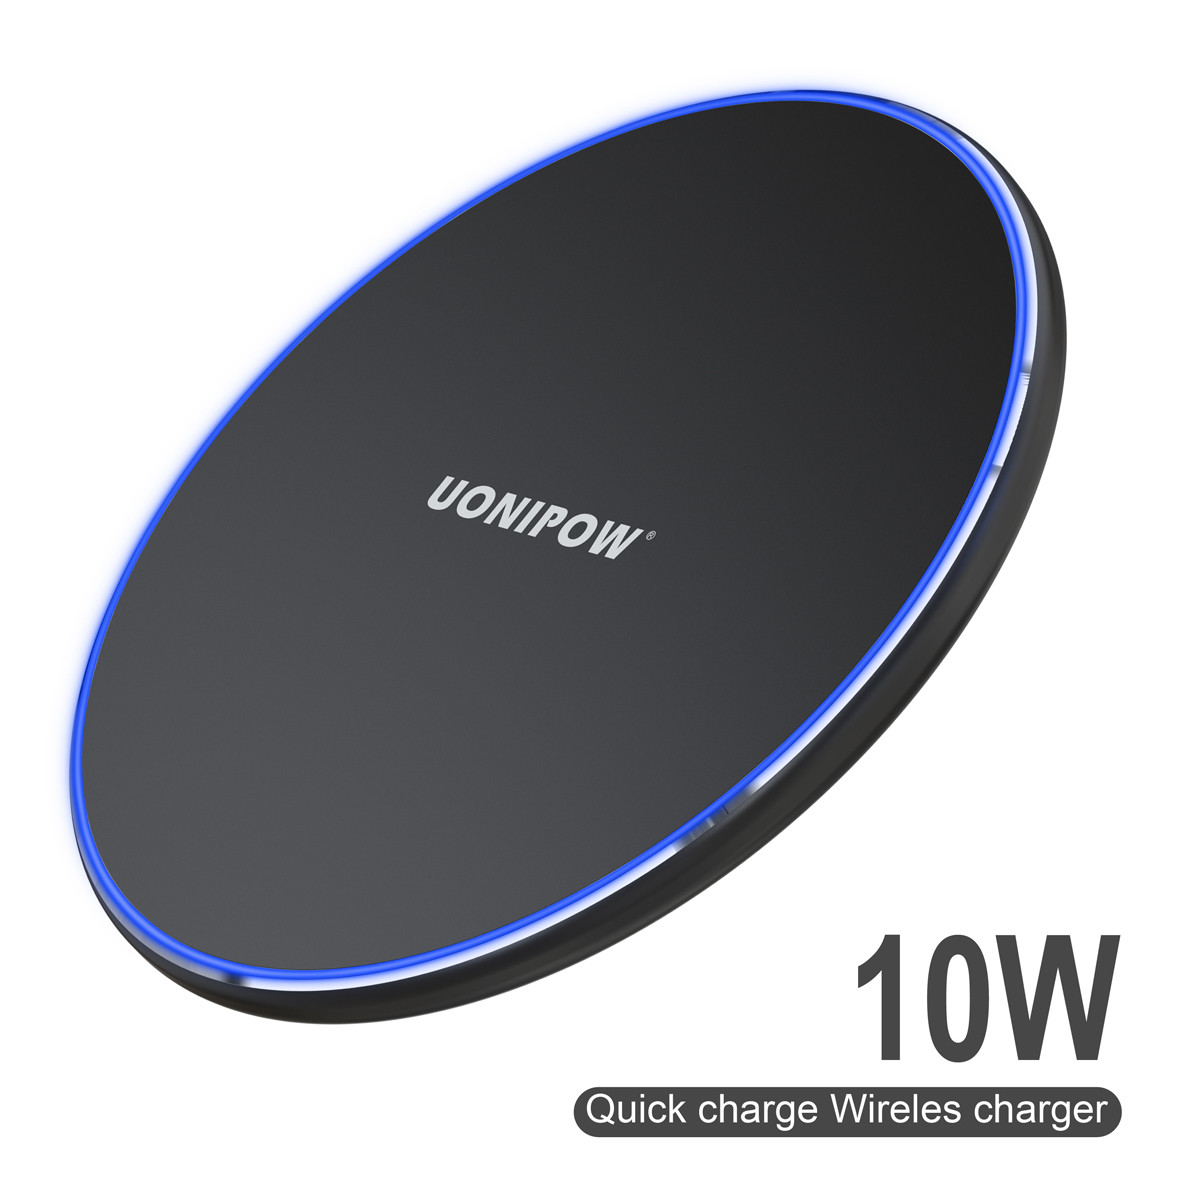 2020 New Product Hot Sale LED Display Fast Charging Wireless Charging Pad 10w Qi Wireless Charger